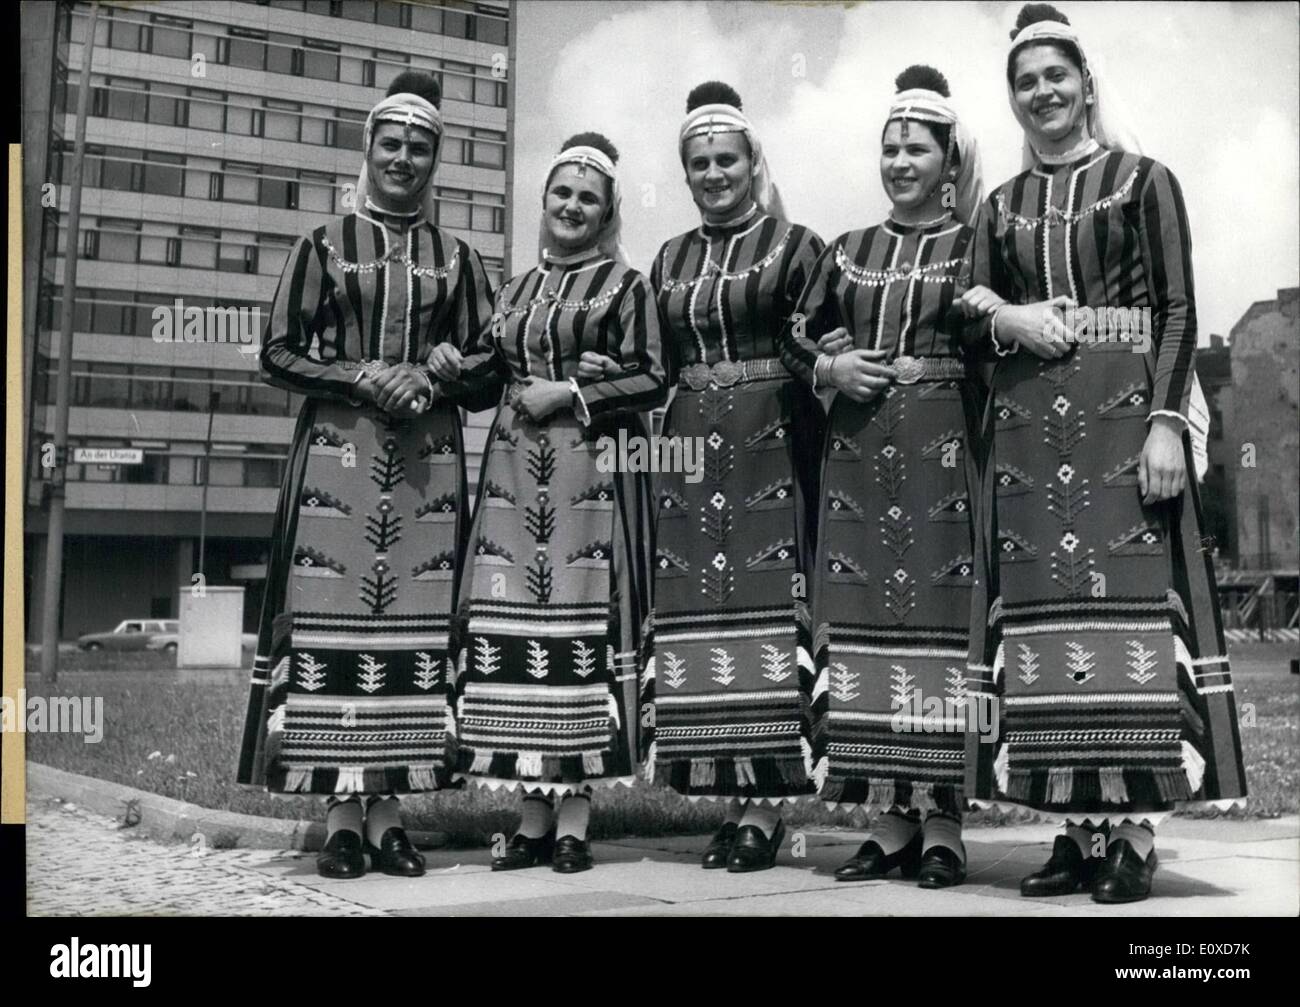 Jun. 06, 1966 - Bulgarian Folklore in Berlin: For the first time an artist team from Bulgaria, the ''State Bulgarian Folklore Ensemble of Sofia,'' arrived in the divided city on June 22 and will entertain Berliners for the next several days. The ensemble was established fi Stock Photo